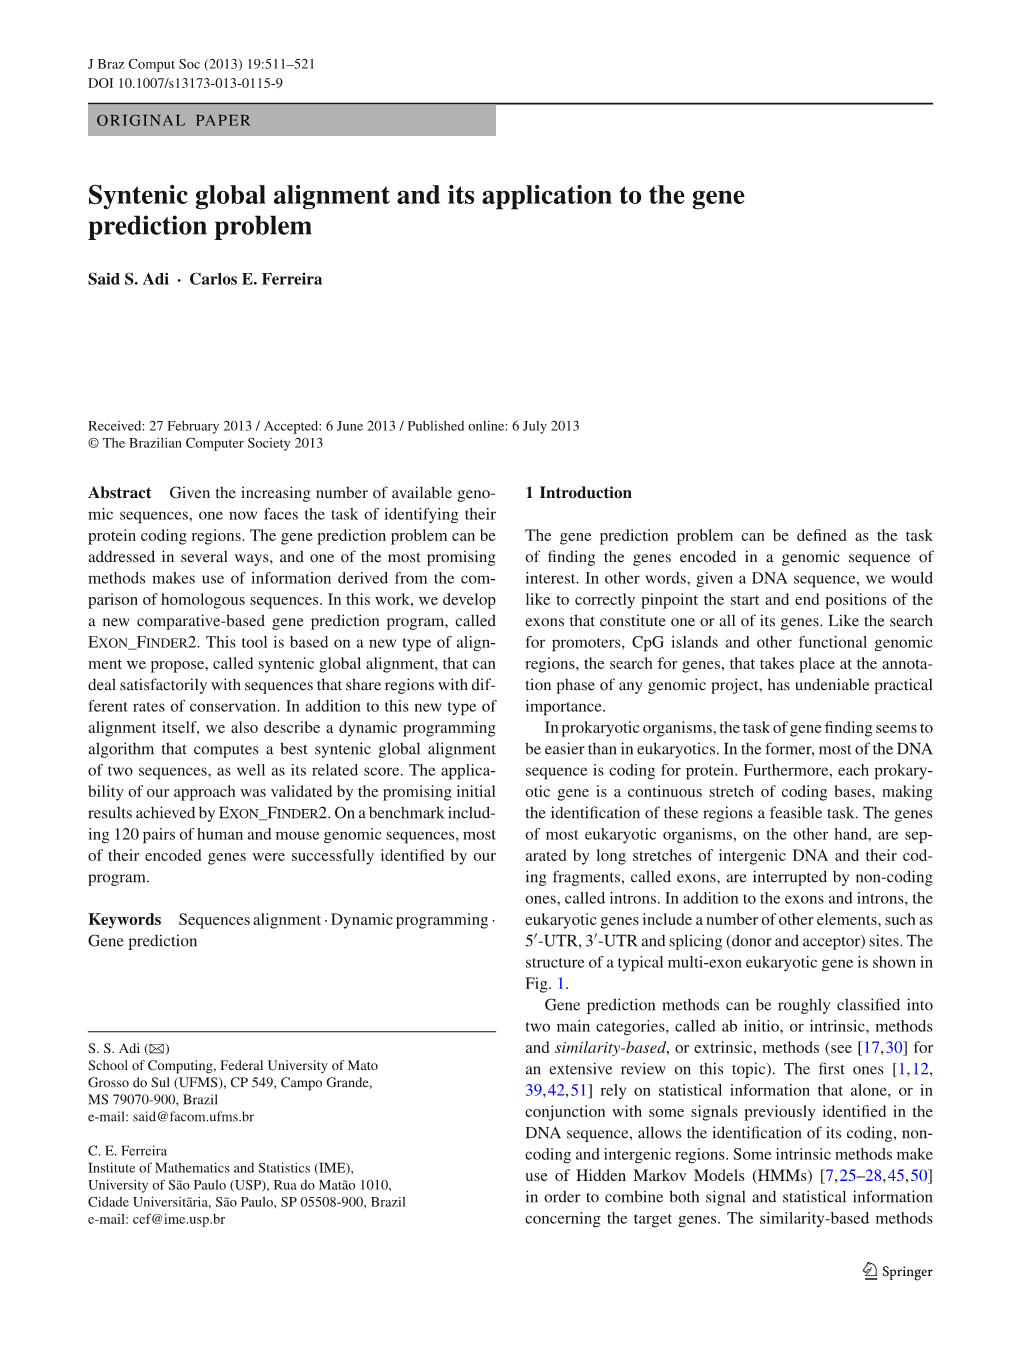 Syntenic Global Alignment and Its Application to the Gene Prediction Problem